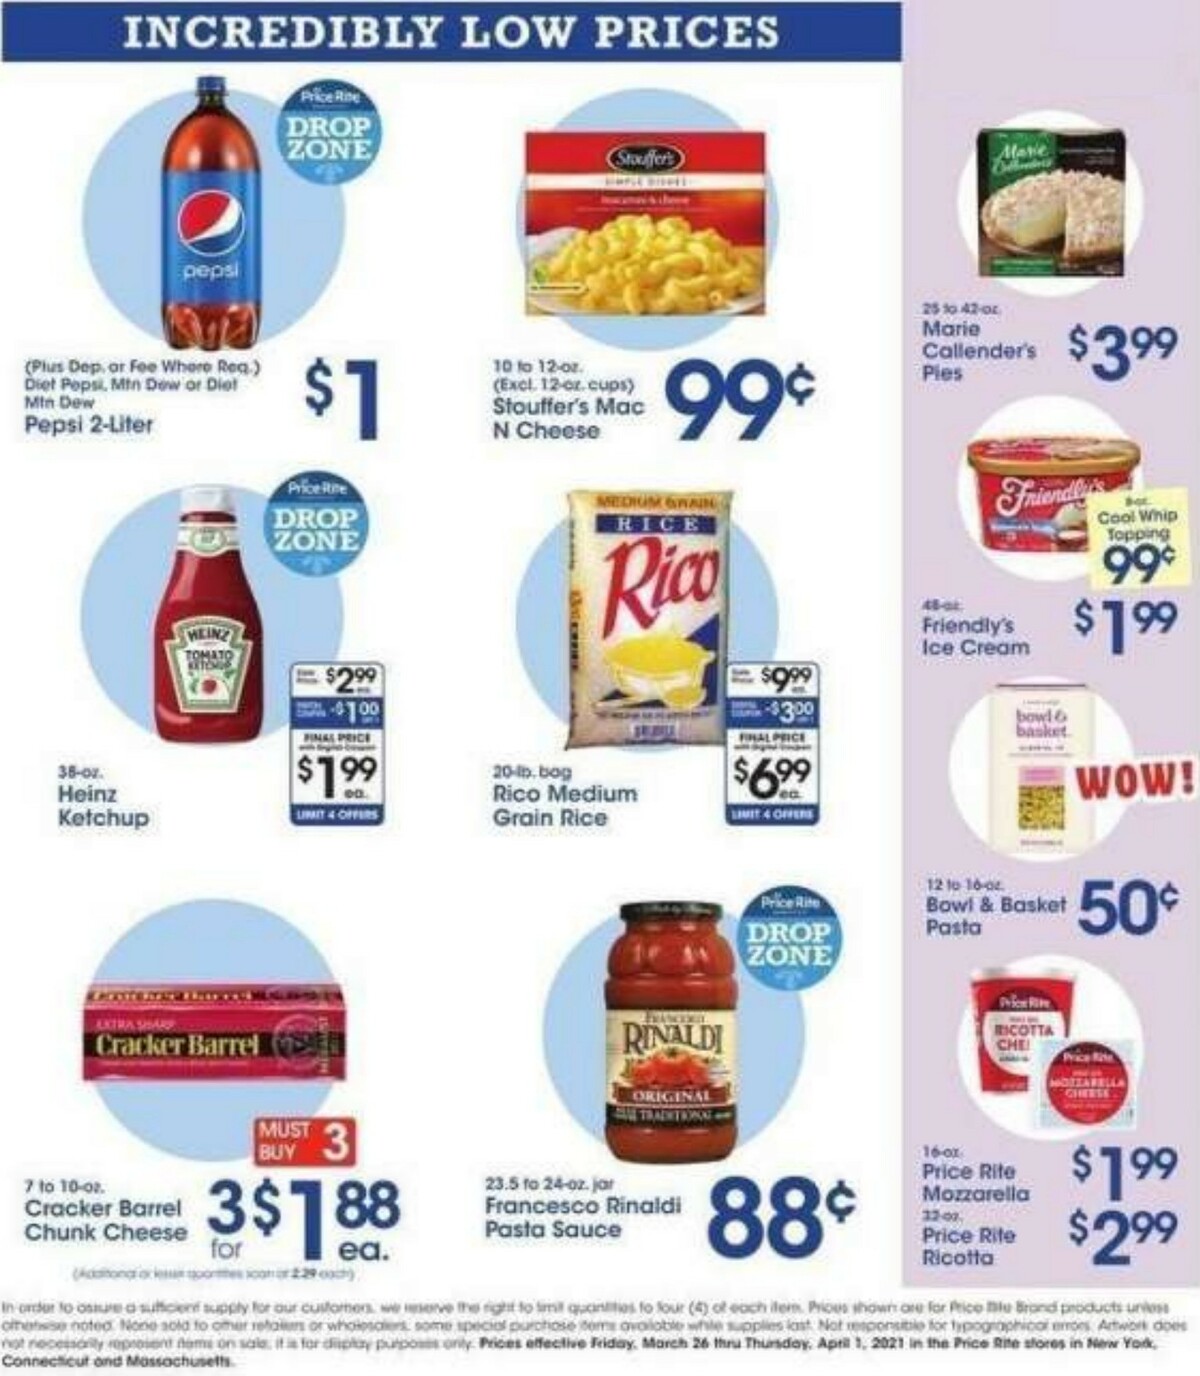 Price Rite Weekly Ad from March 26